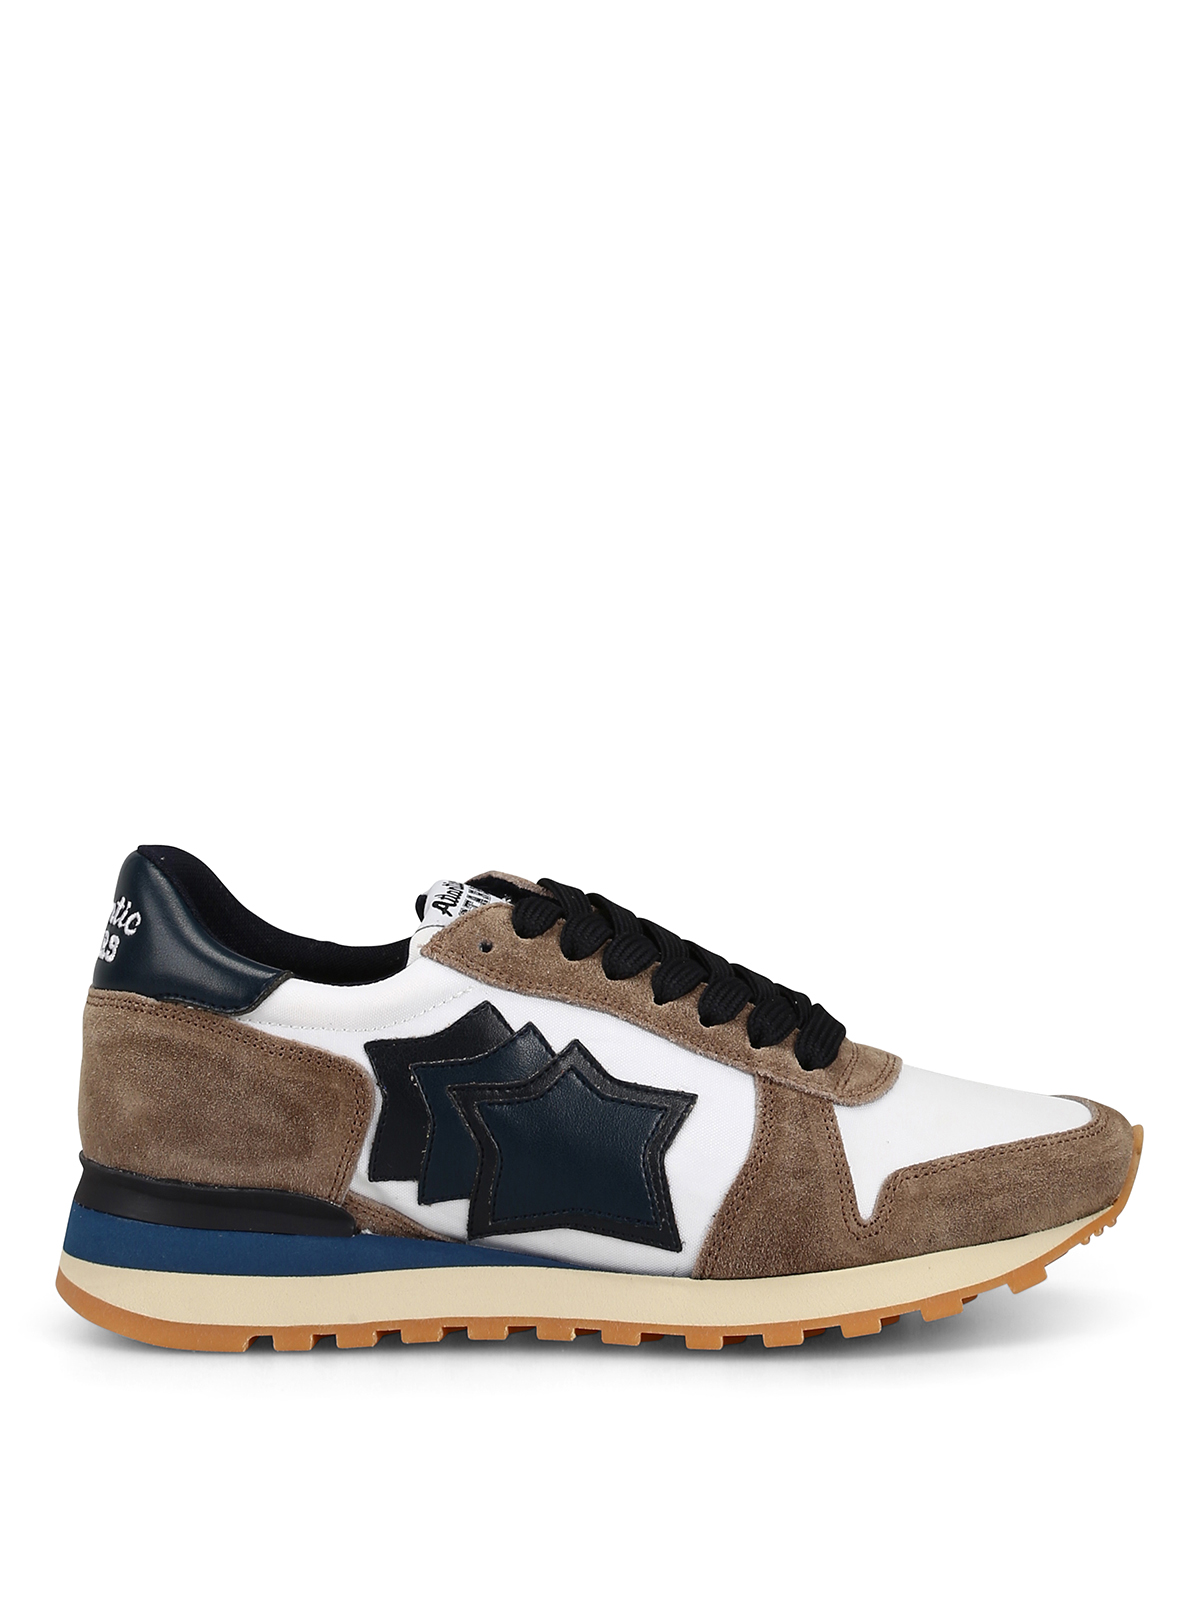 Trainers Atlantic Stars - Argo brown suede and white upper sneakers ...